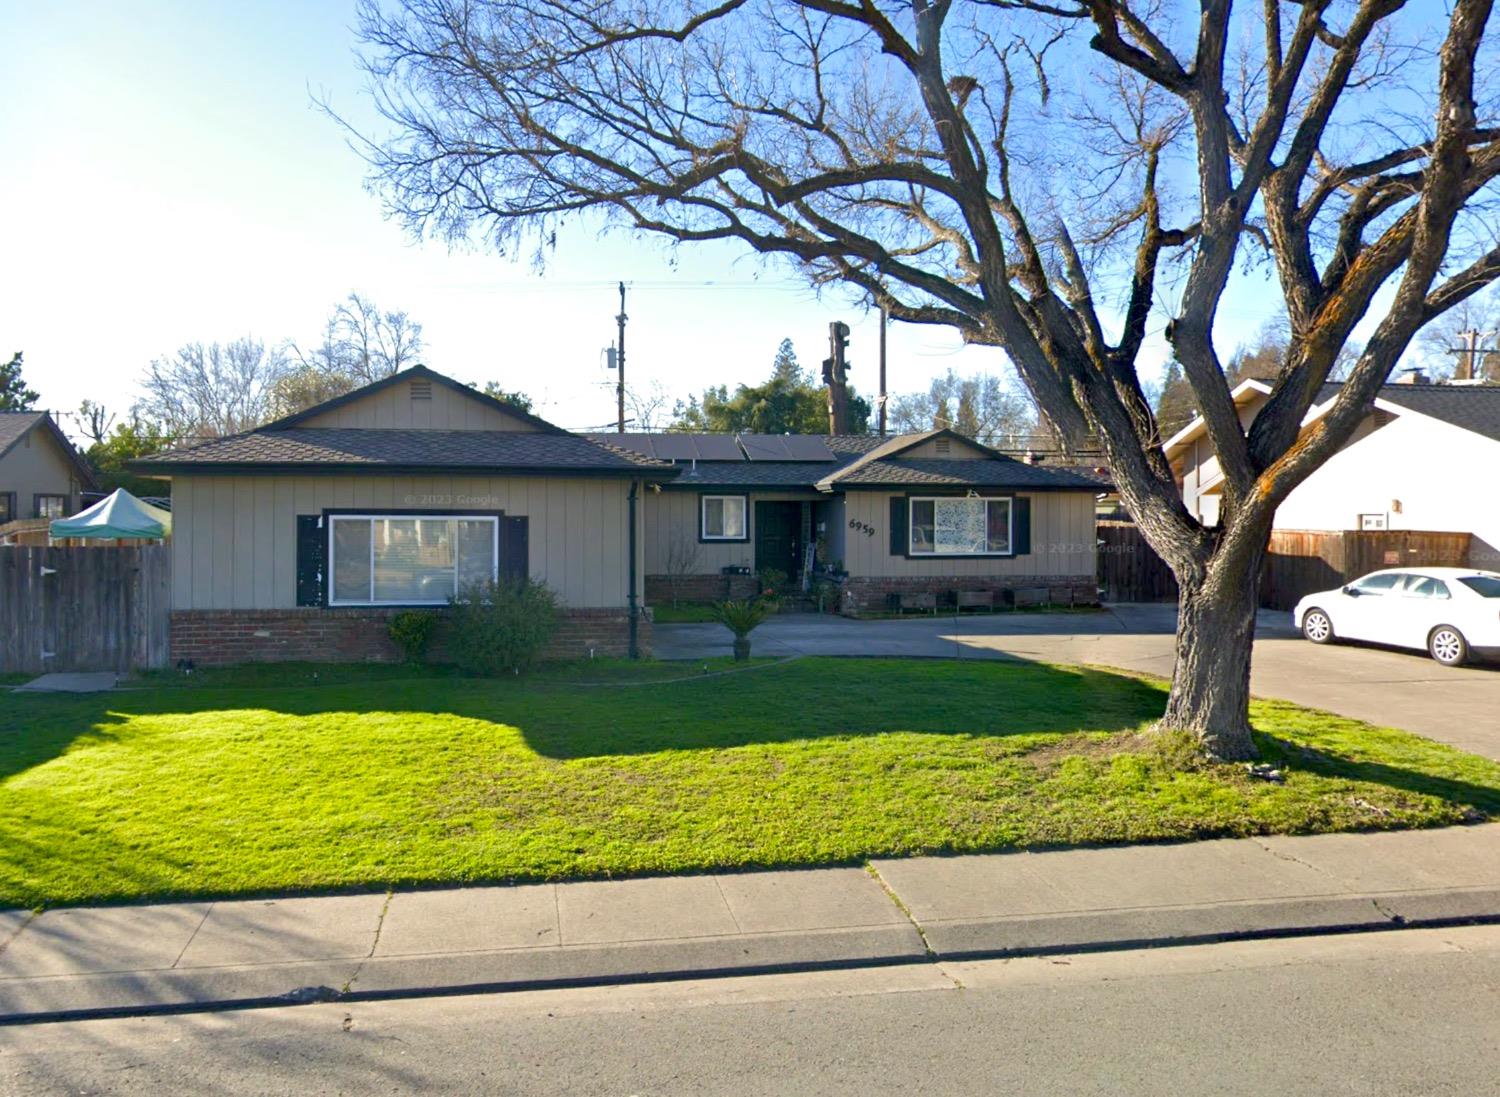 Photo of 6959 N Pershing Ave in Stockton, CA